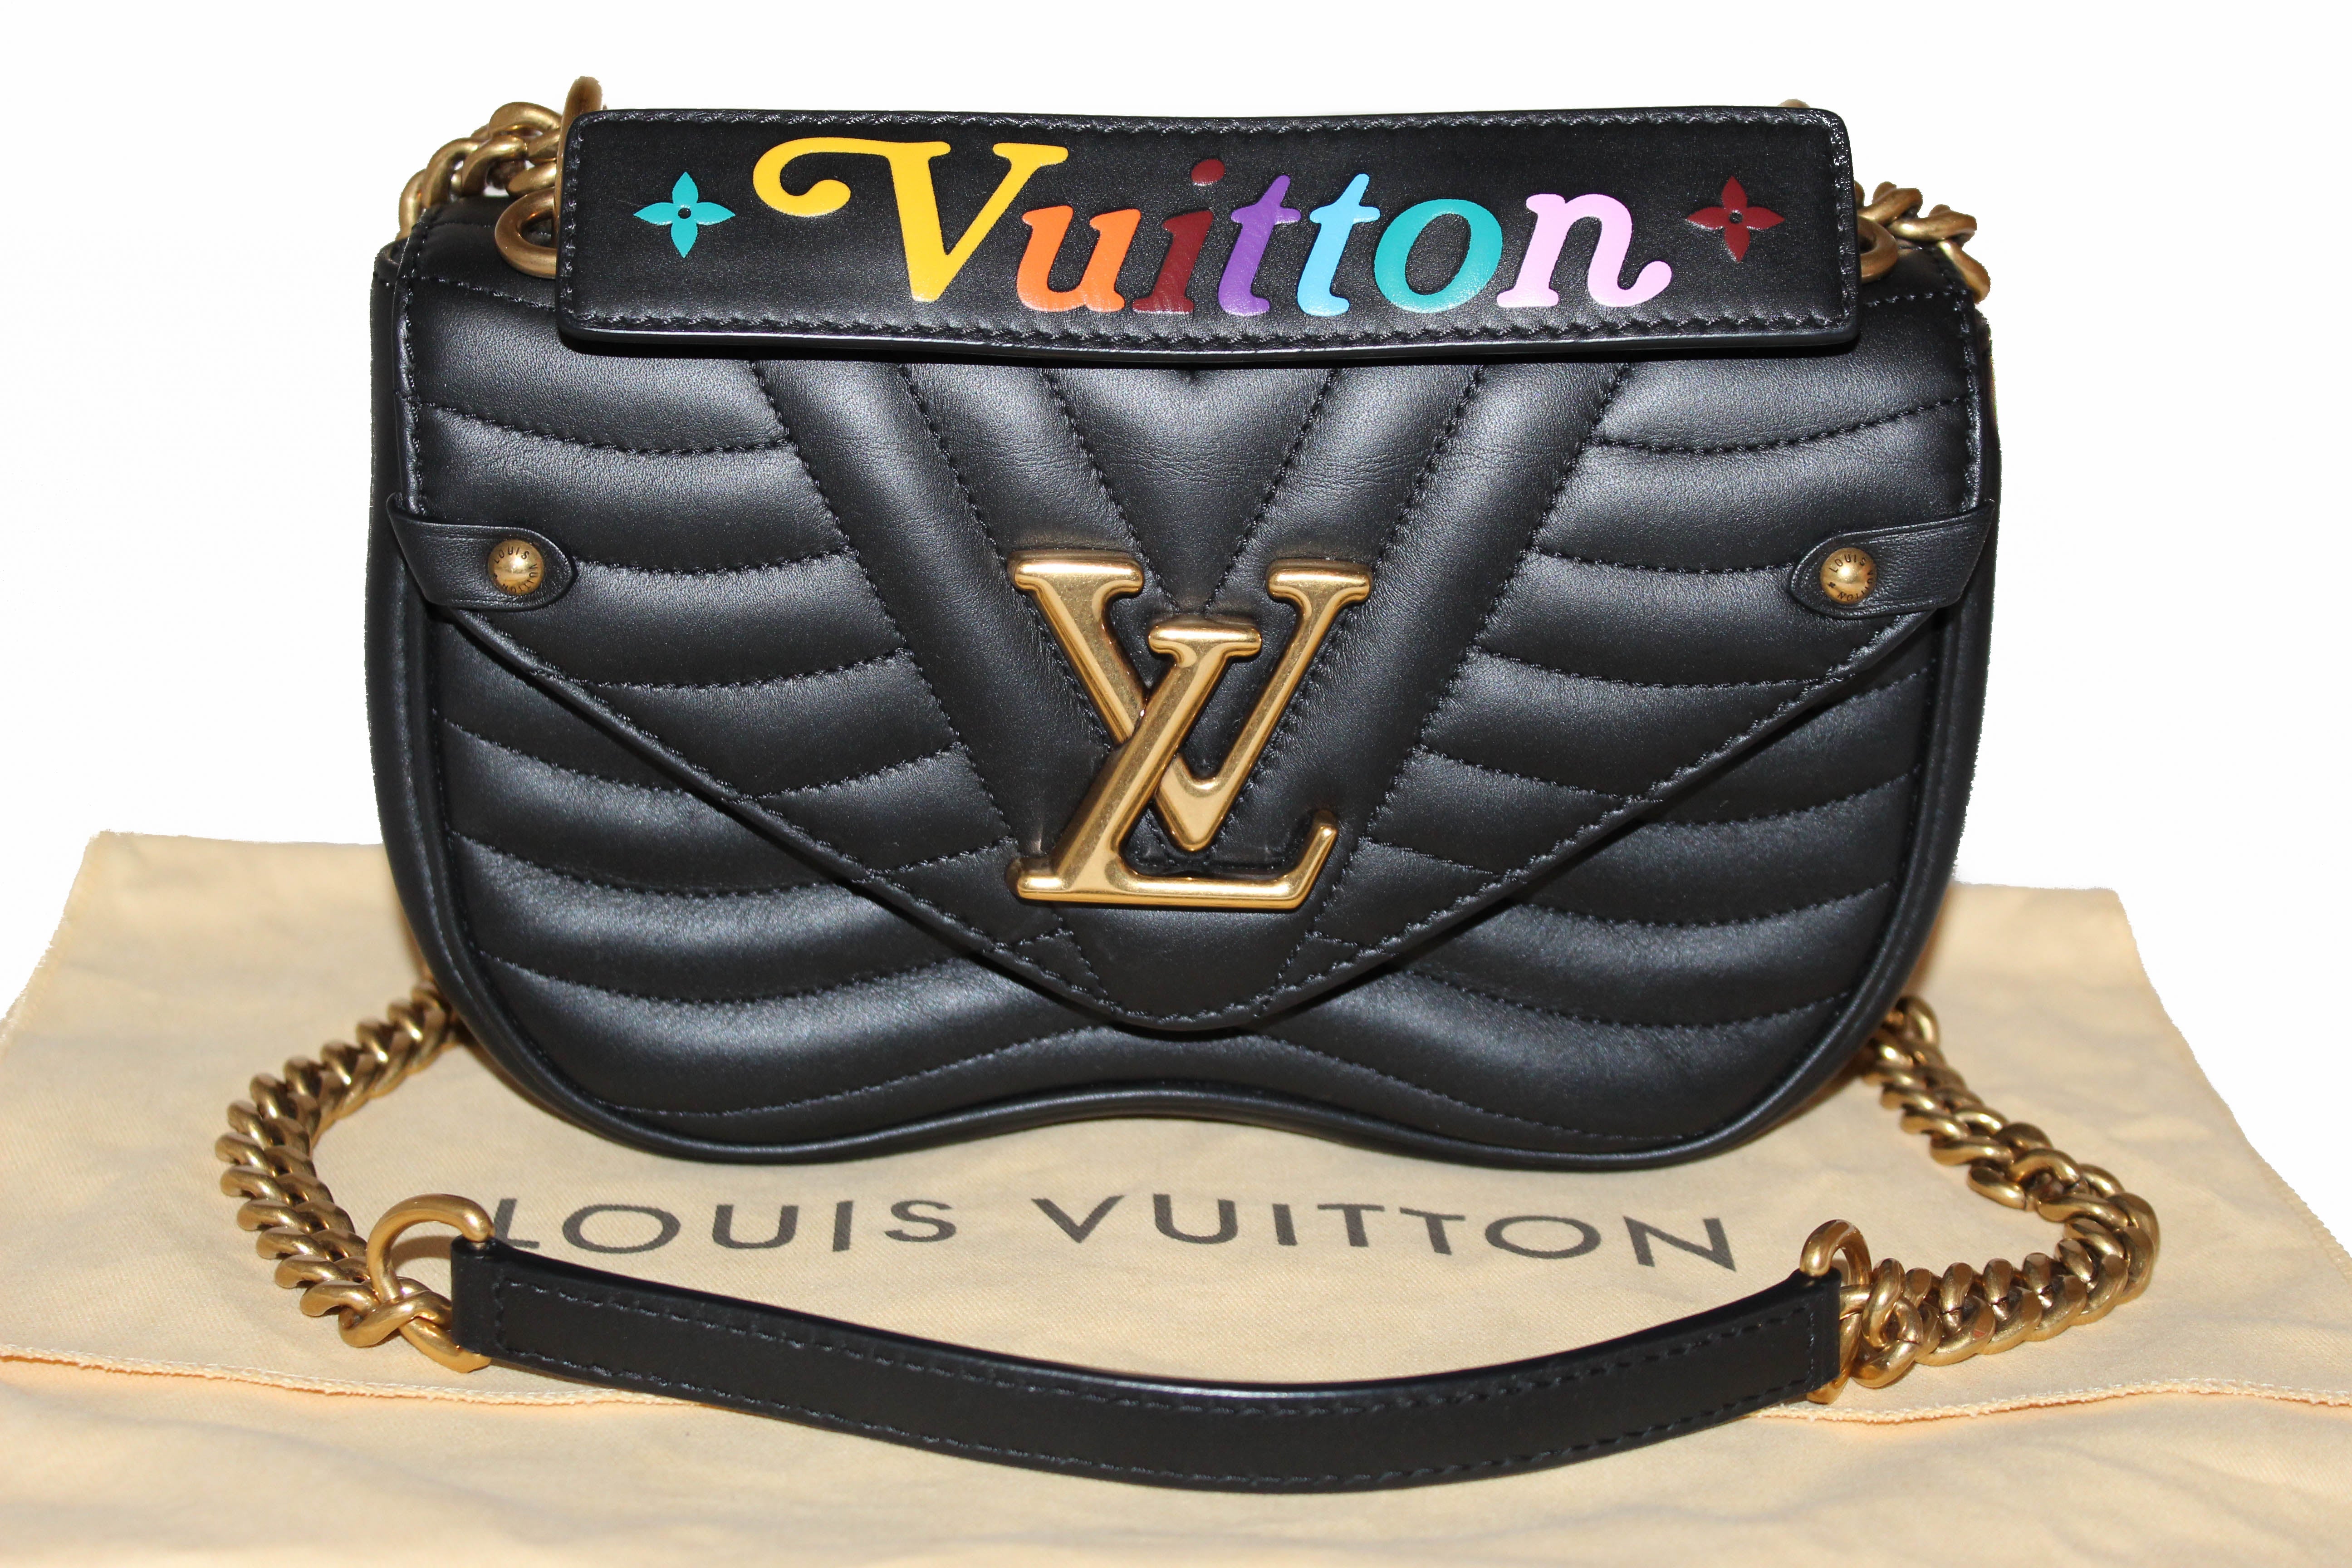 New $2850 Louis Vuitton LV Leather New Wave Chain Bag PM Black Italy